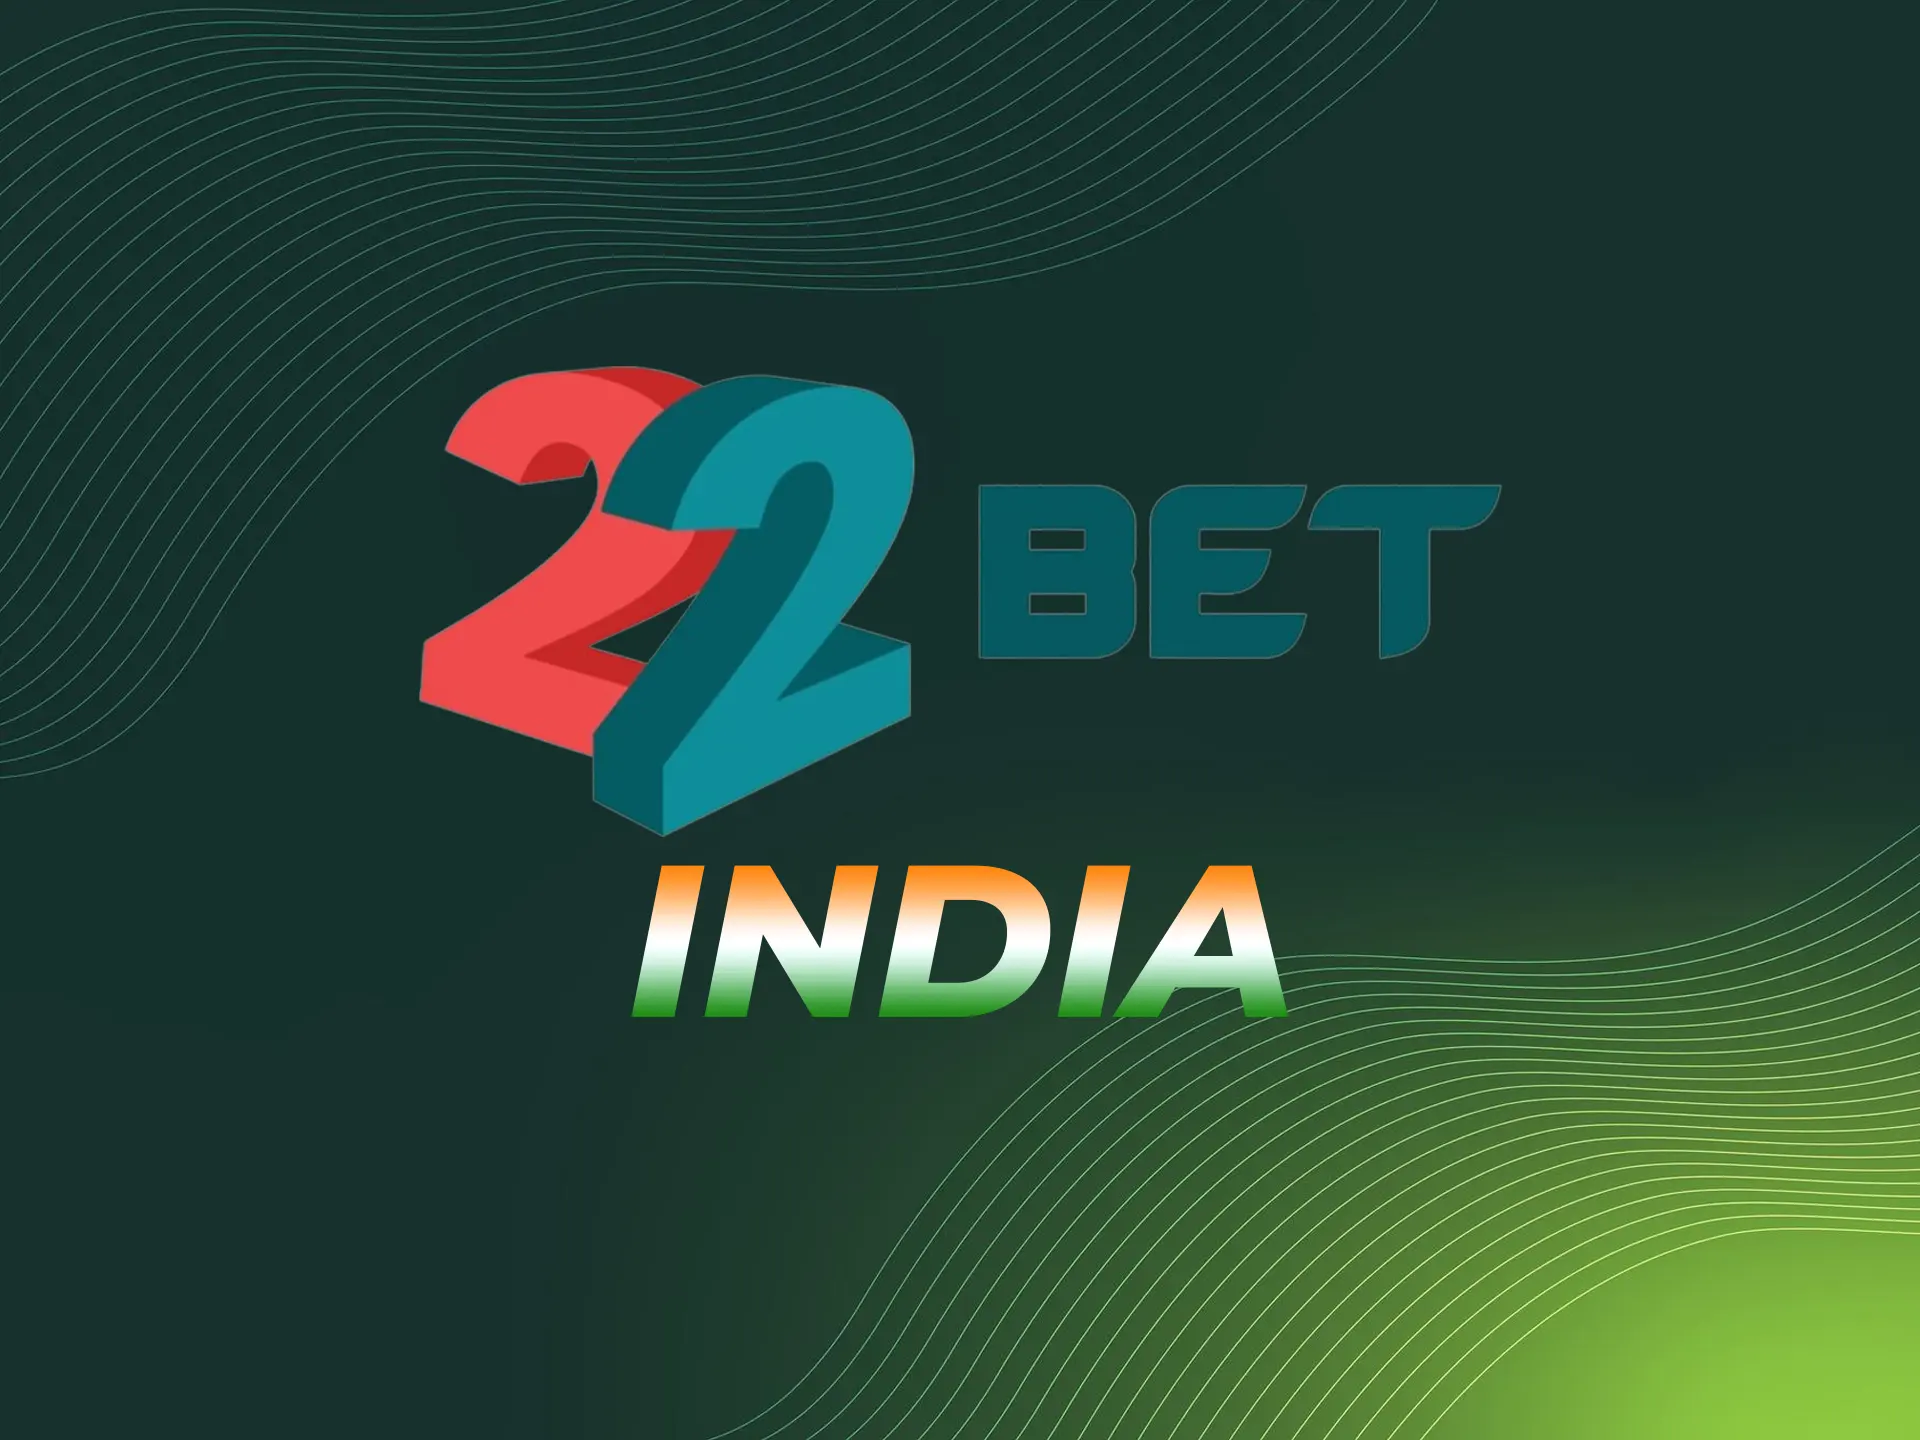 Information about the bookmaker 22Bet which has a strong position in the Indian betting market since 2017.